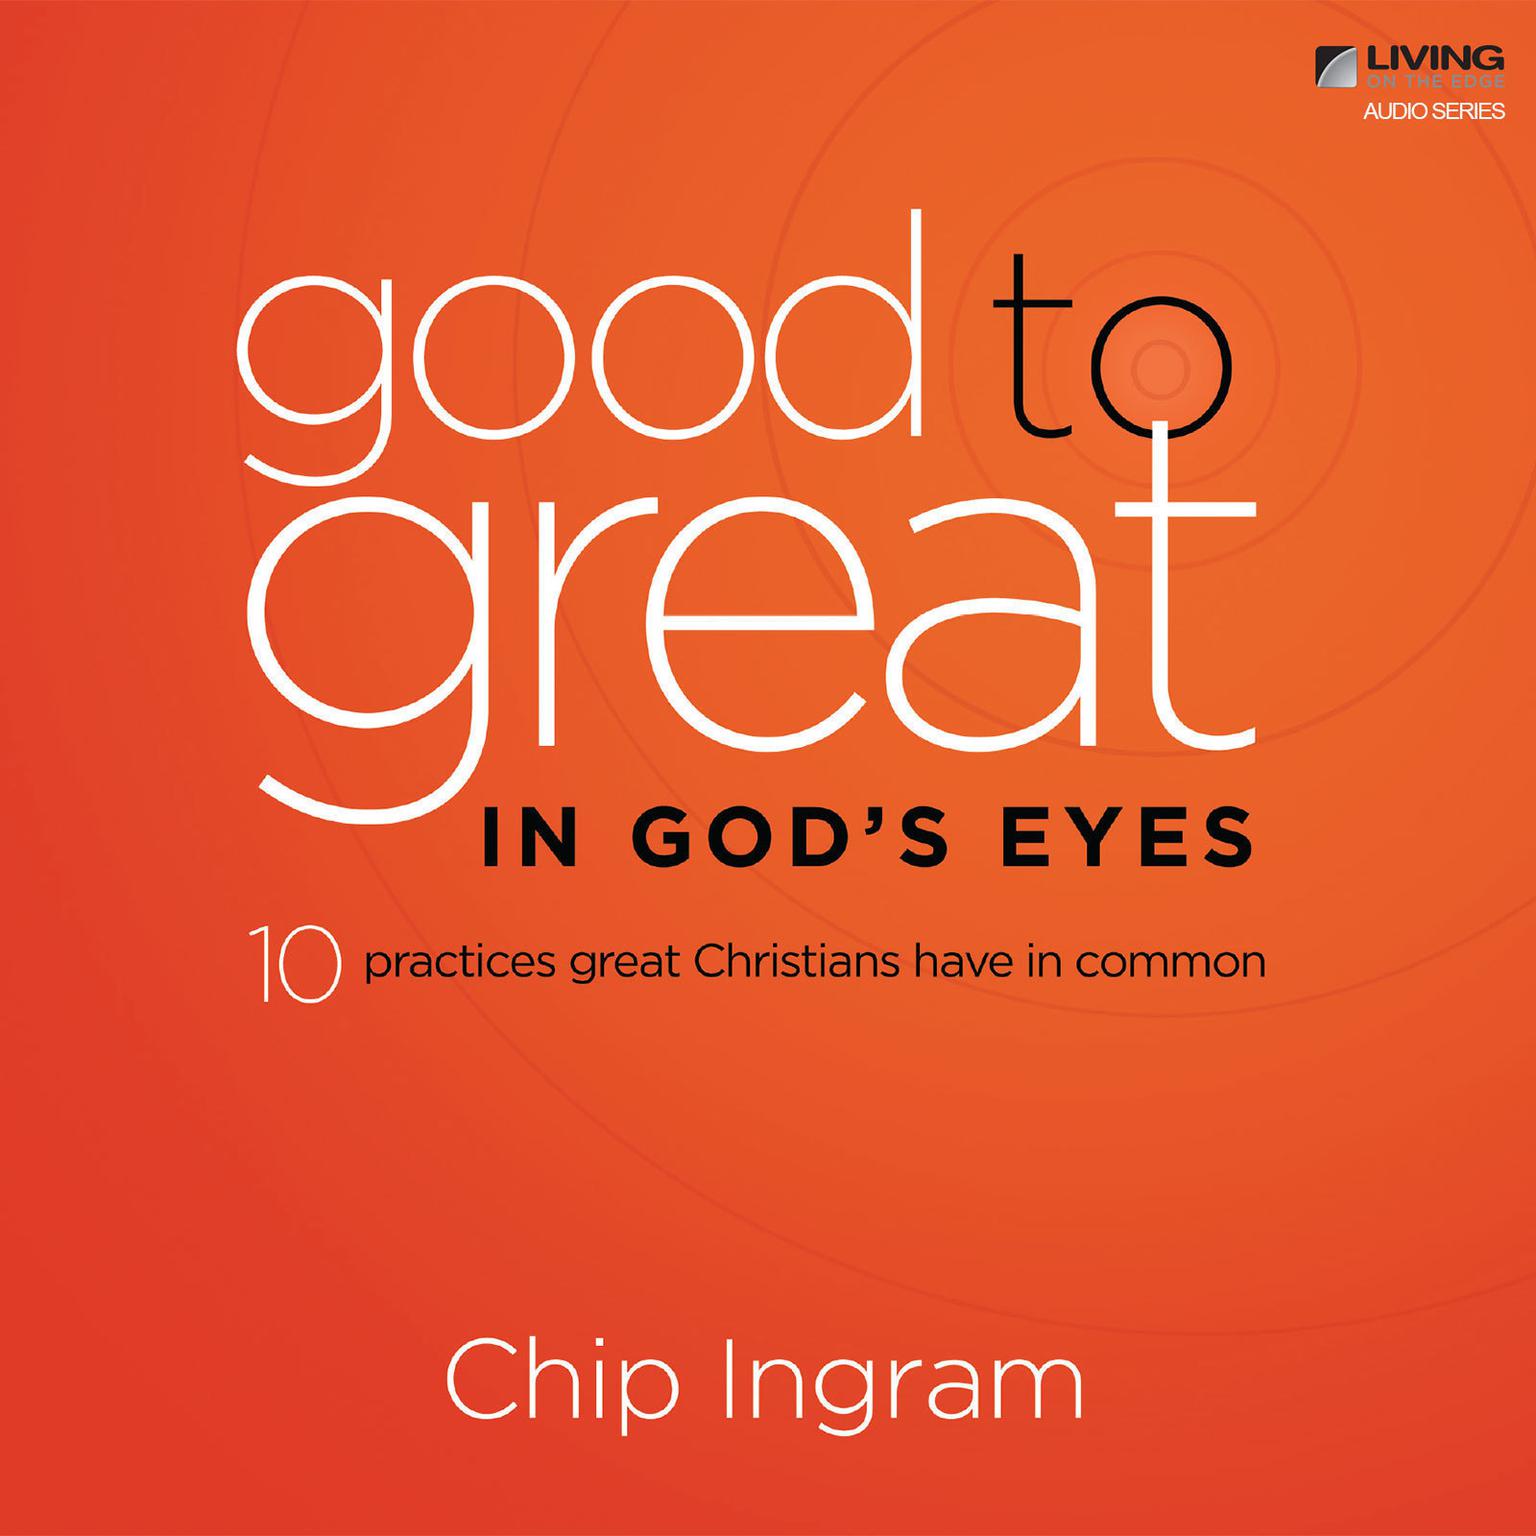 Good to Great in Gods Eyes: Ten Practices Great Christians have in Common Audiobook, by Chip Ingram